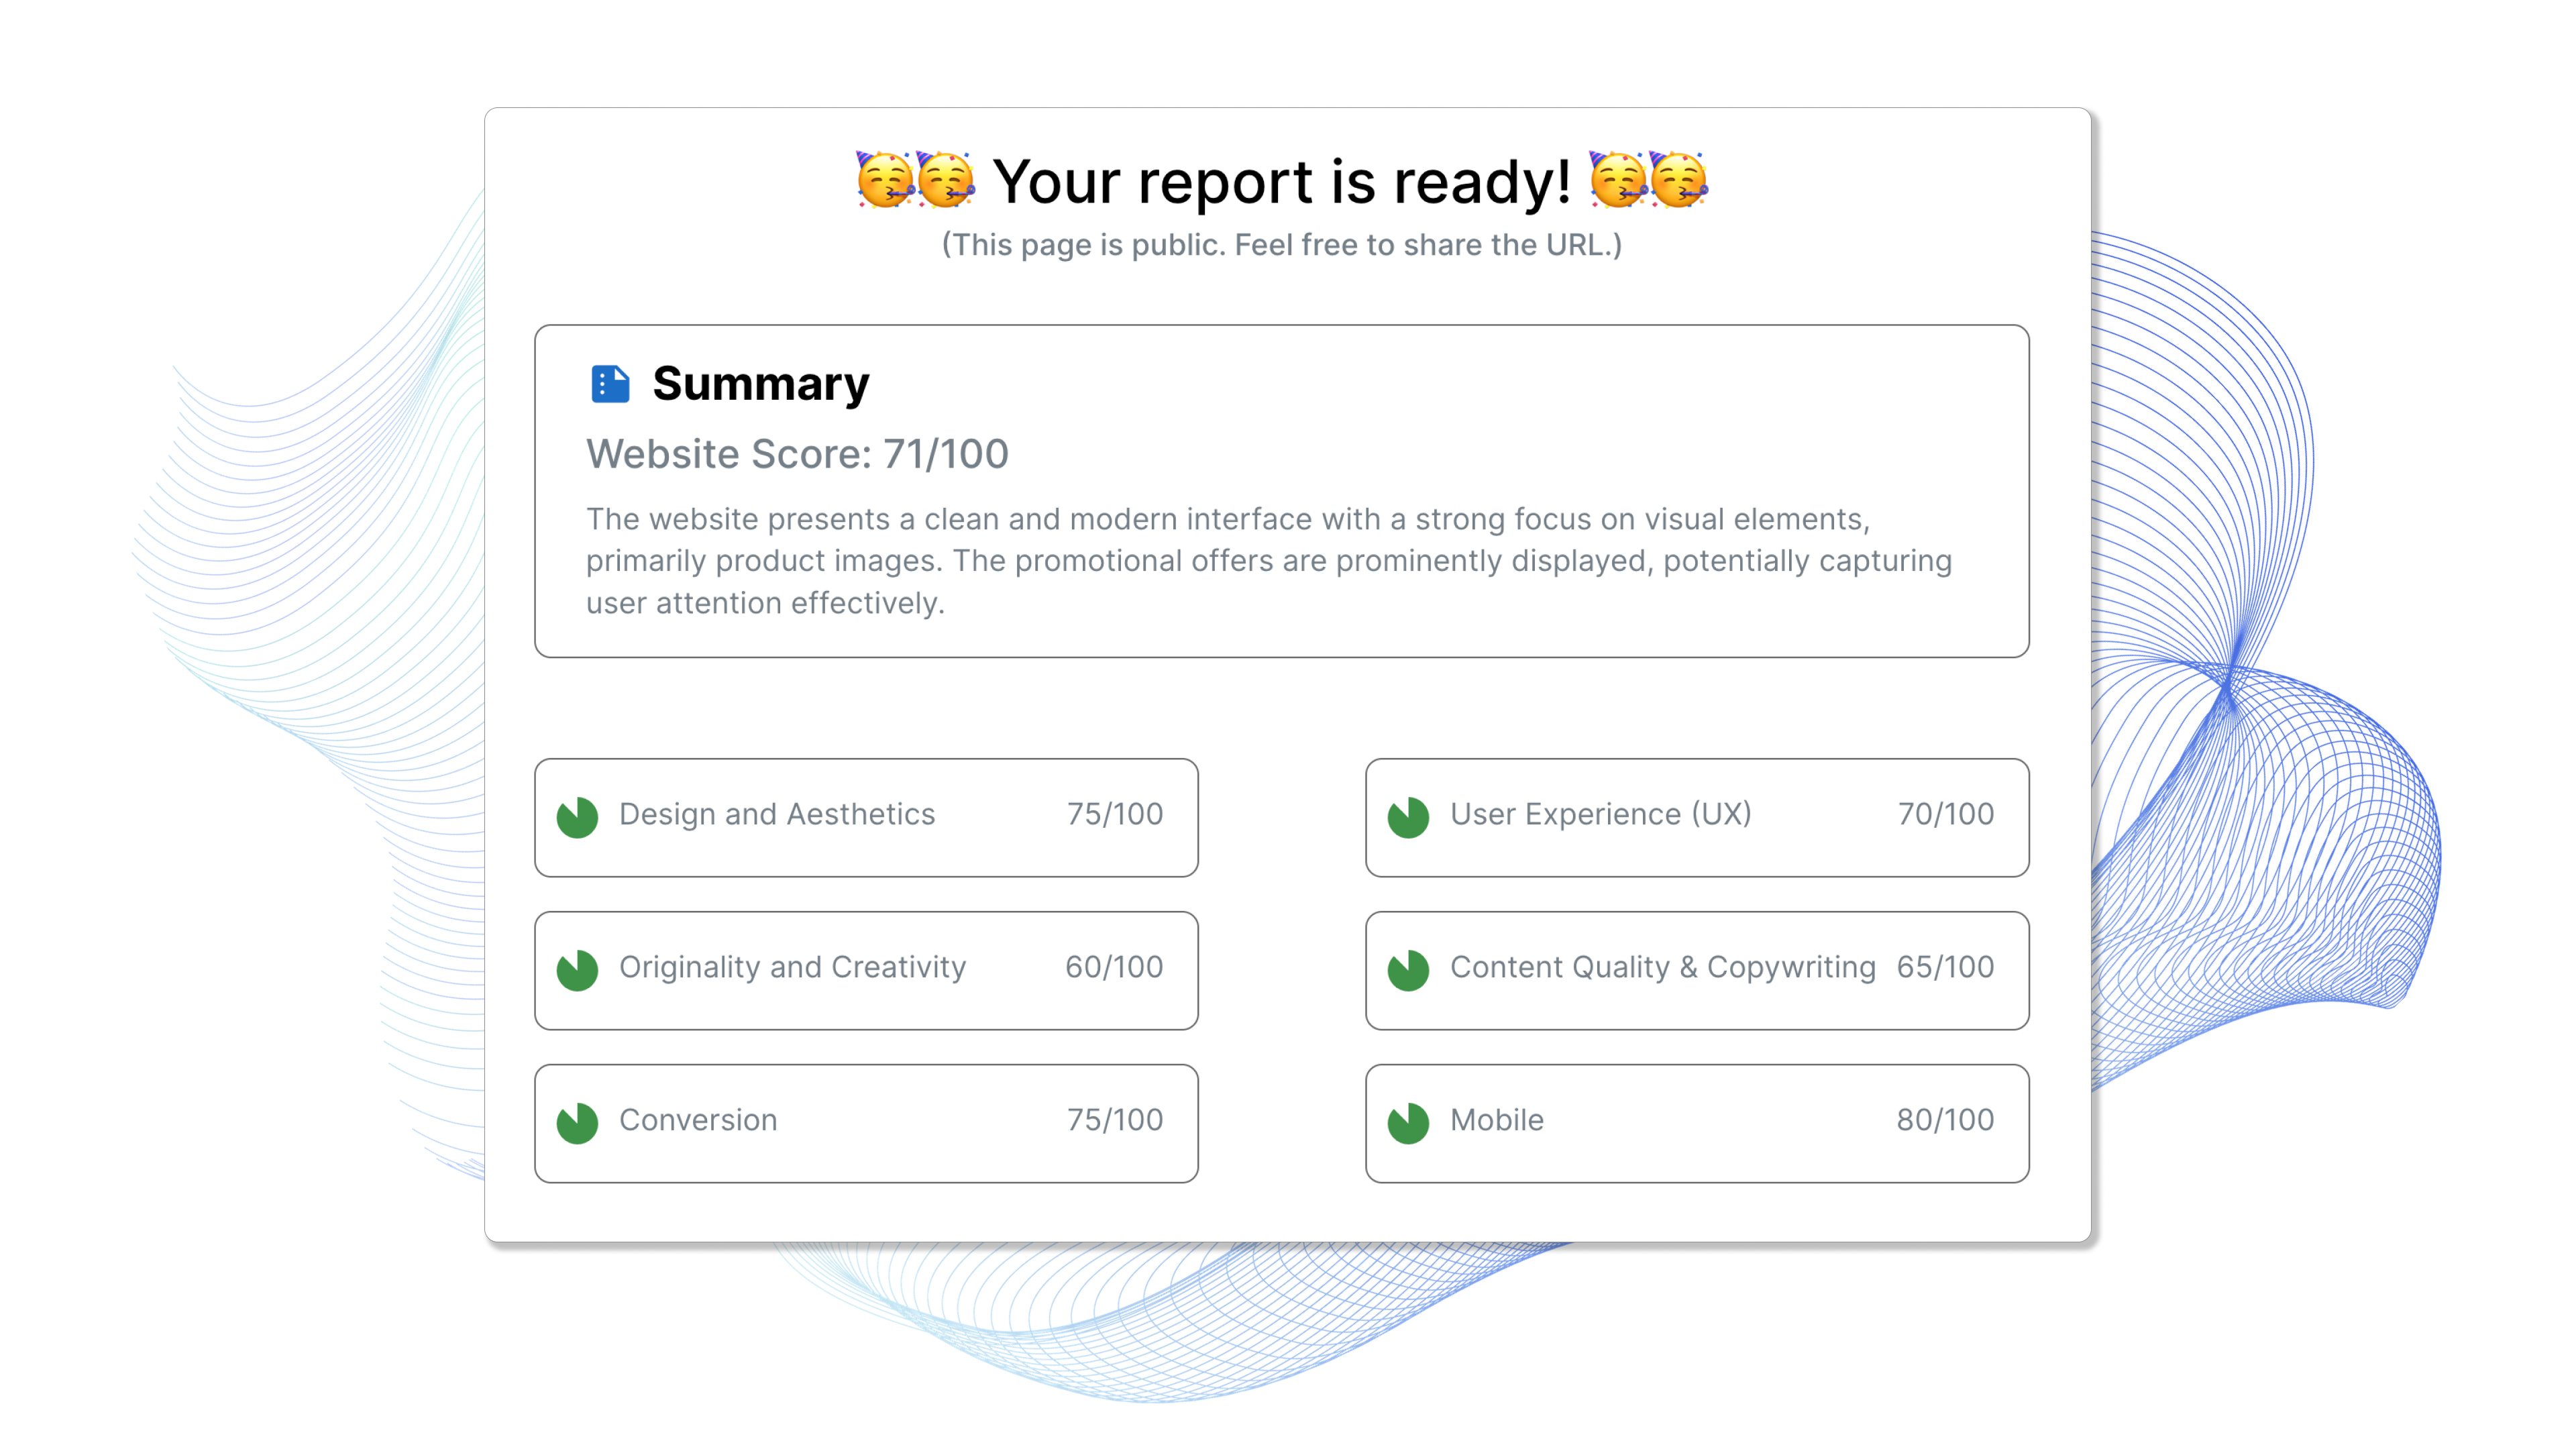 Get Website Report is an innovative web service that leverages state of the art AI models to analyze and optimize landing pages across five main categ